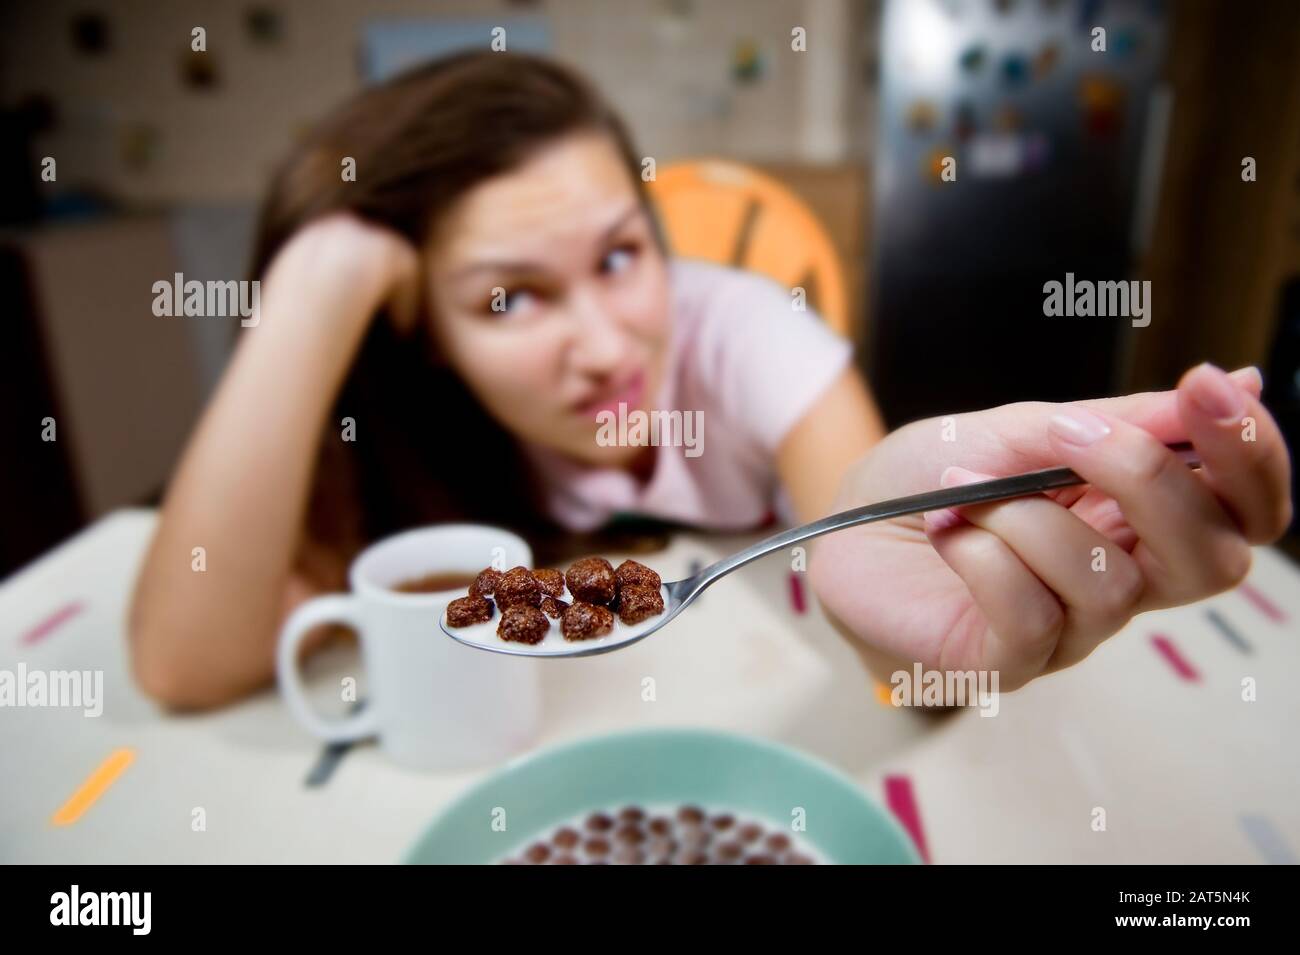 A young woman shows a spoon with chocolate balls and expresses a reluctance to eat them. Chocolate cereal with milk in focus and girl with grimace in Stock Photo